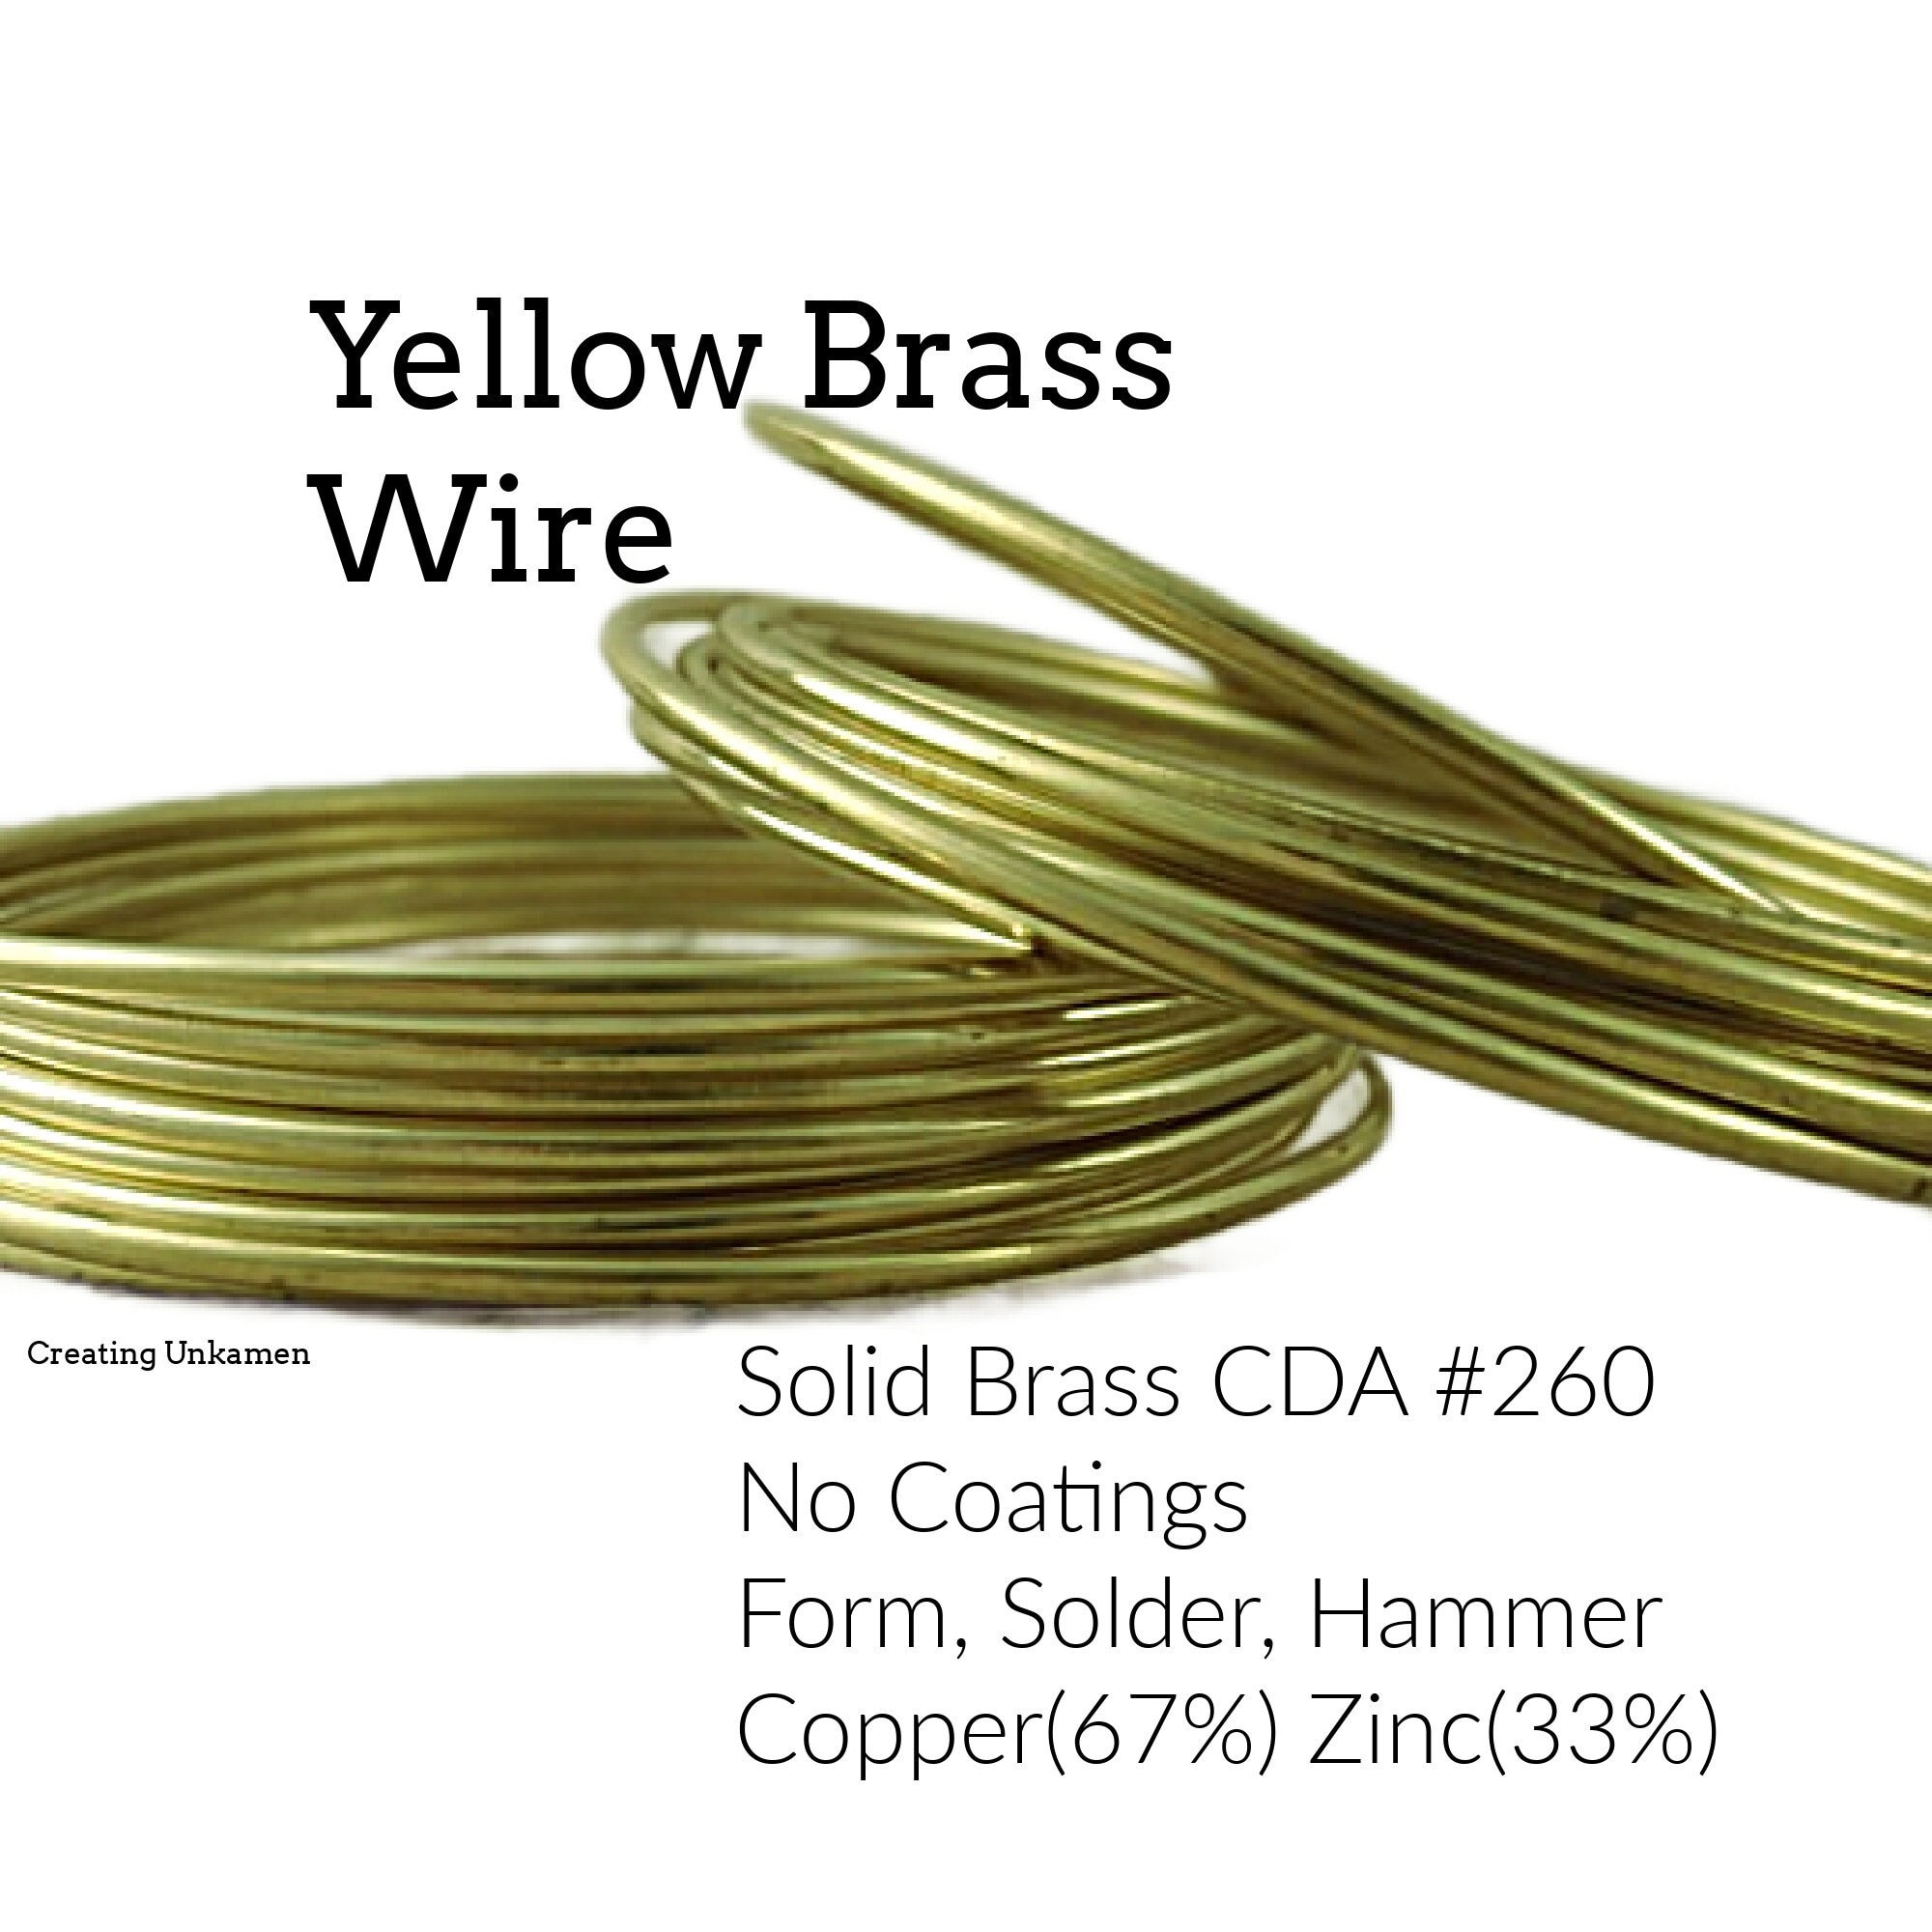 18 Gauge Round Dead Soft Yellow Brass Wire: Jewelry Making Supplies, Instructions